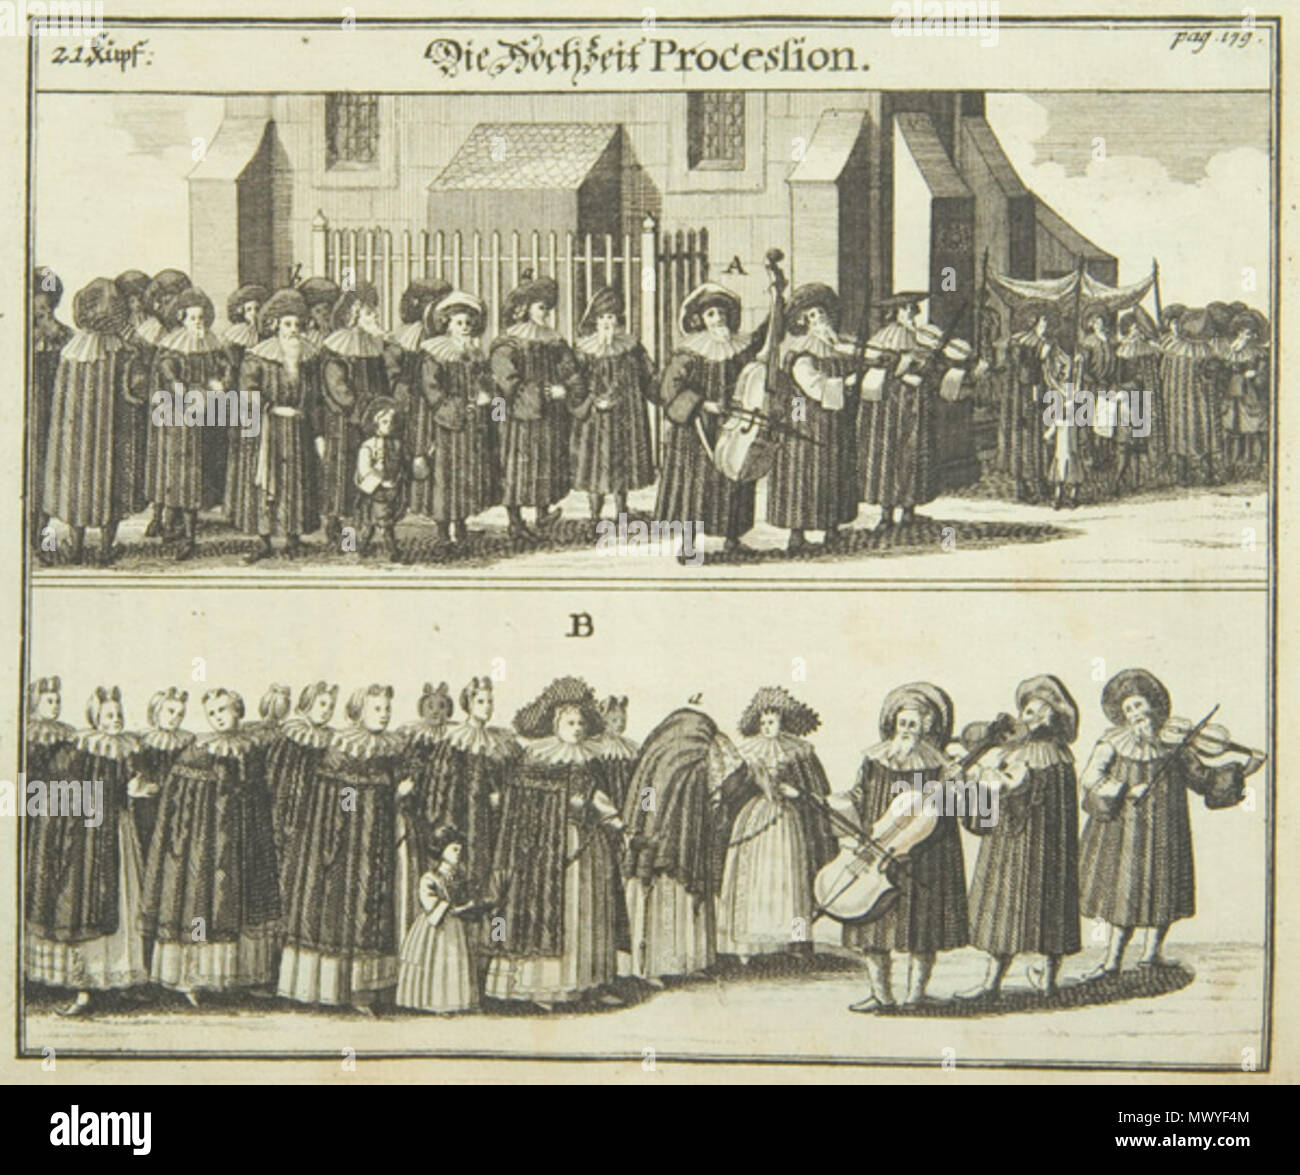 . English: German copperplate engraving, ca. 1700. Juedisches Ceremoniel In the top panel, the bridegroom is led past the synagogue by the male members of the community to the wedding canopy visible on the right. In the bottom panel, the veiled bride is being escorted to the ceremony by the women of the community. 19 August 2004. J. G. Puschner. Annotations by Sebastian Jacob Jungendres 20 A Jewish wedding c. 1700 Stock Photo